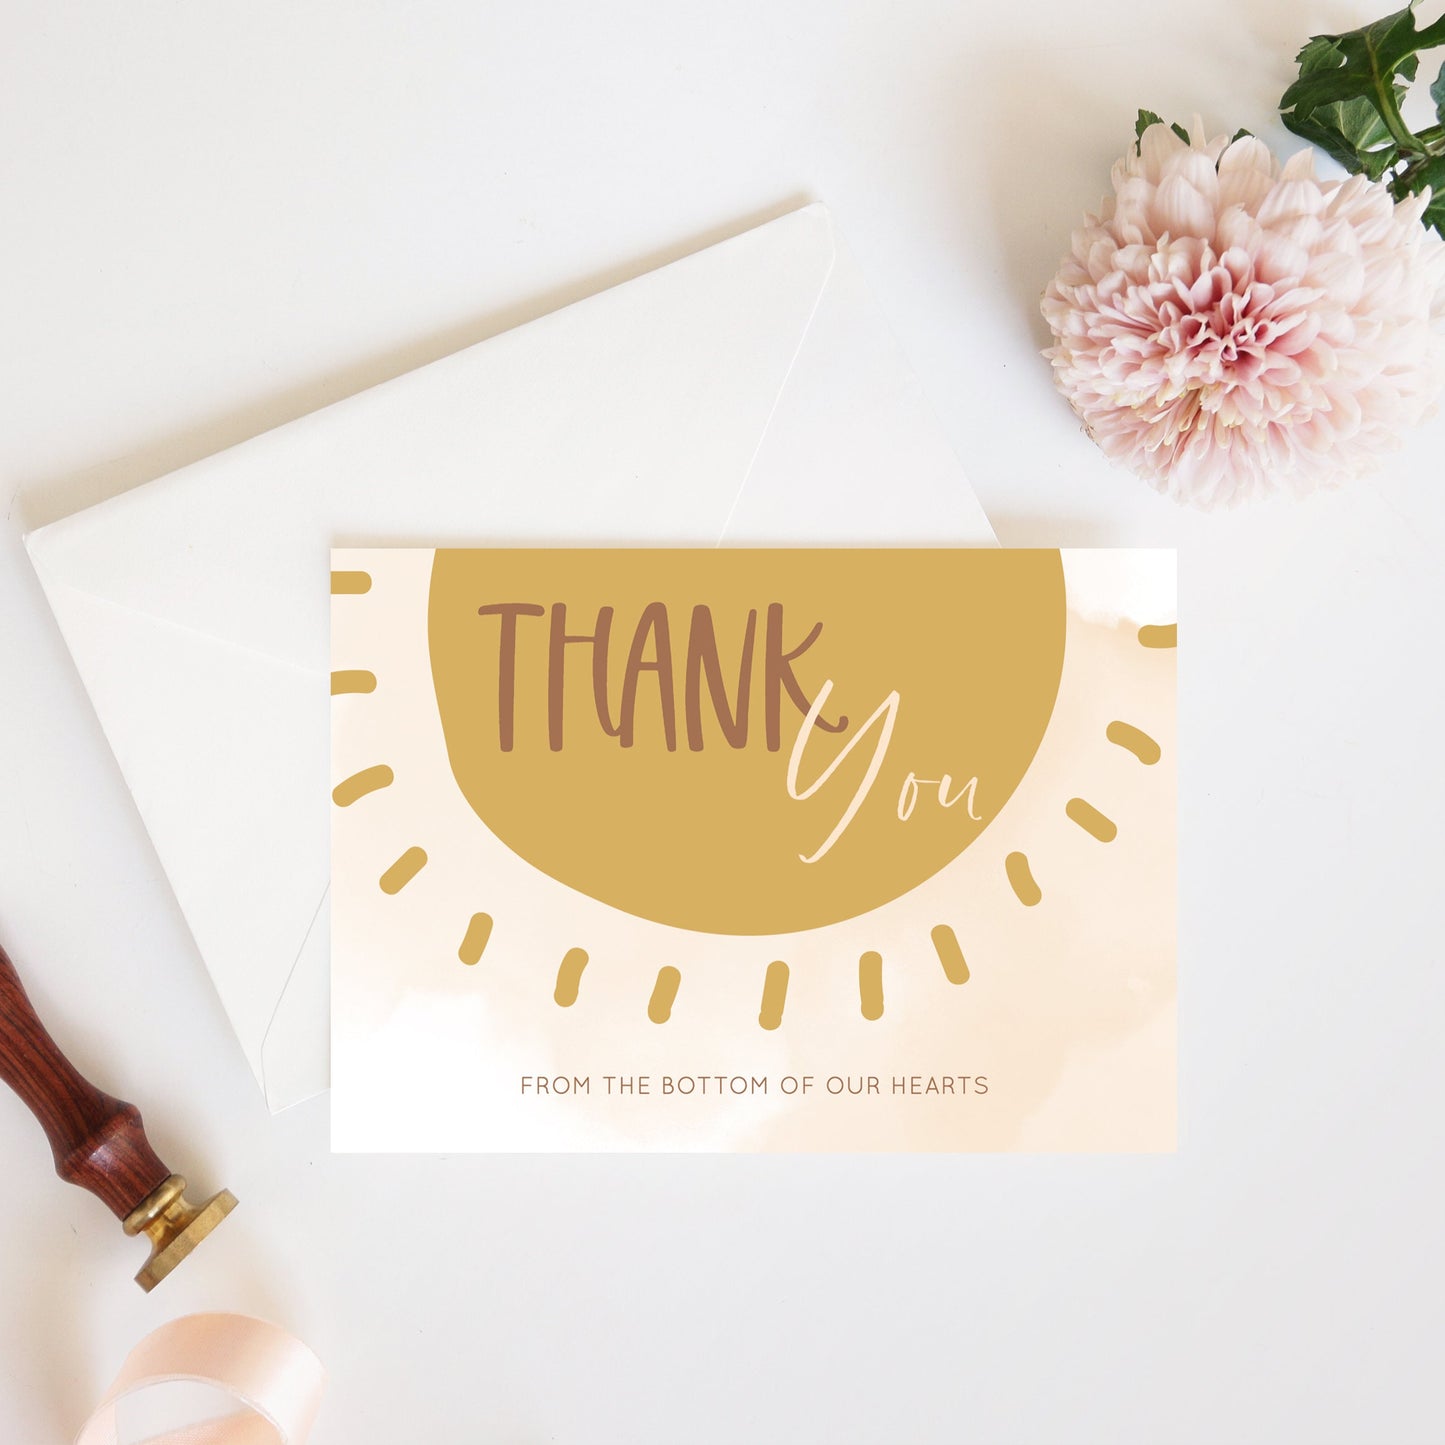 Editable Sunshine Baby Shower Thank You Cards Boho Sun Cards Sunshine First Birthday Thank You Cards Template